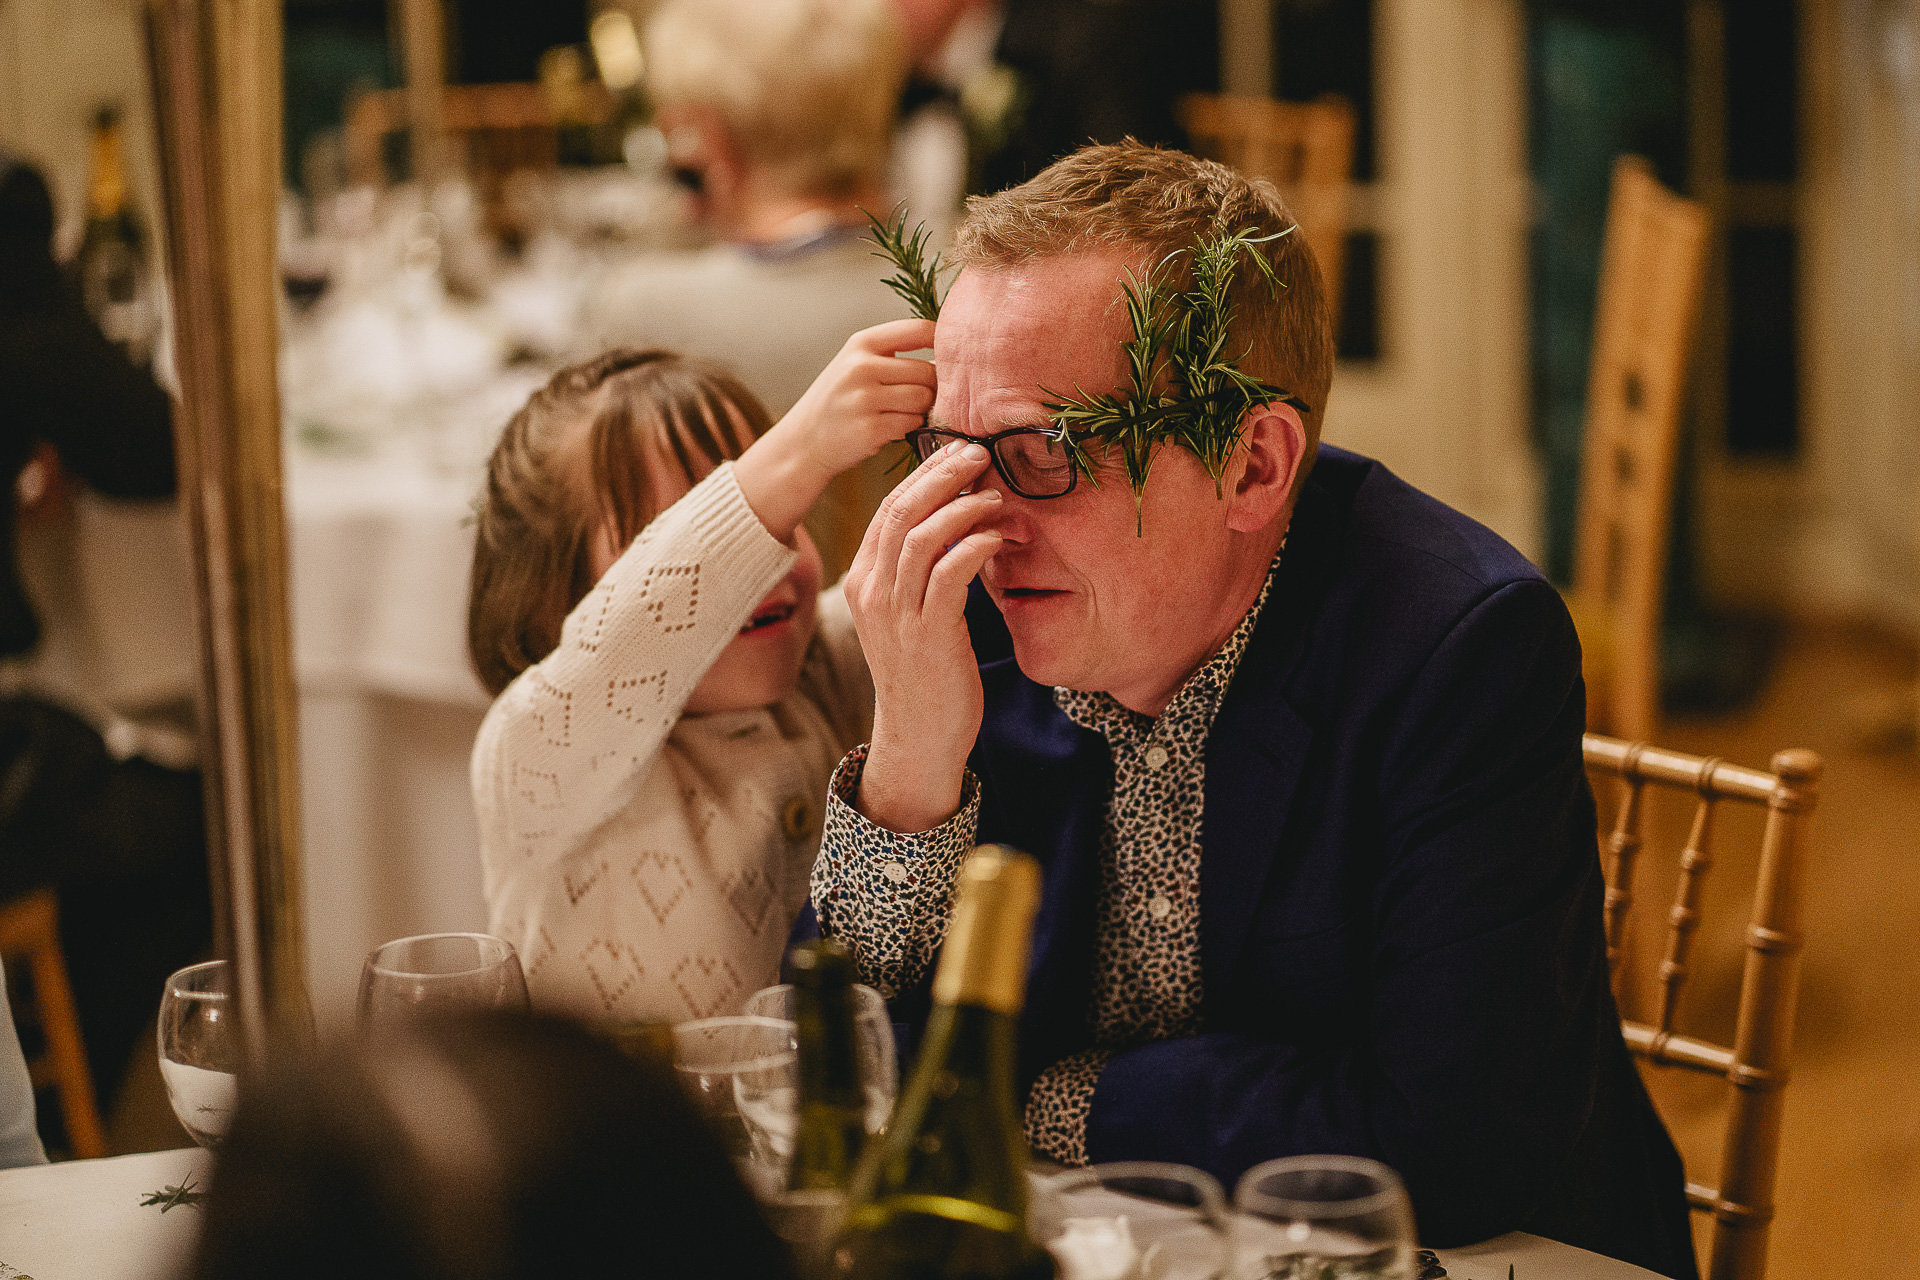 Child placing pieces of rosemary behind a man's glasses